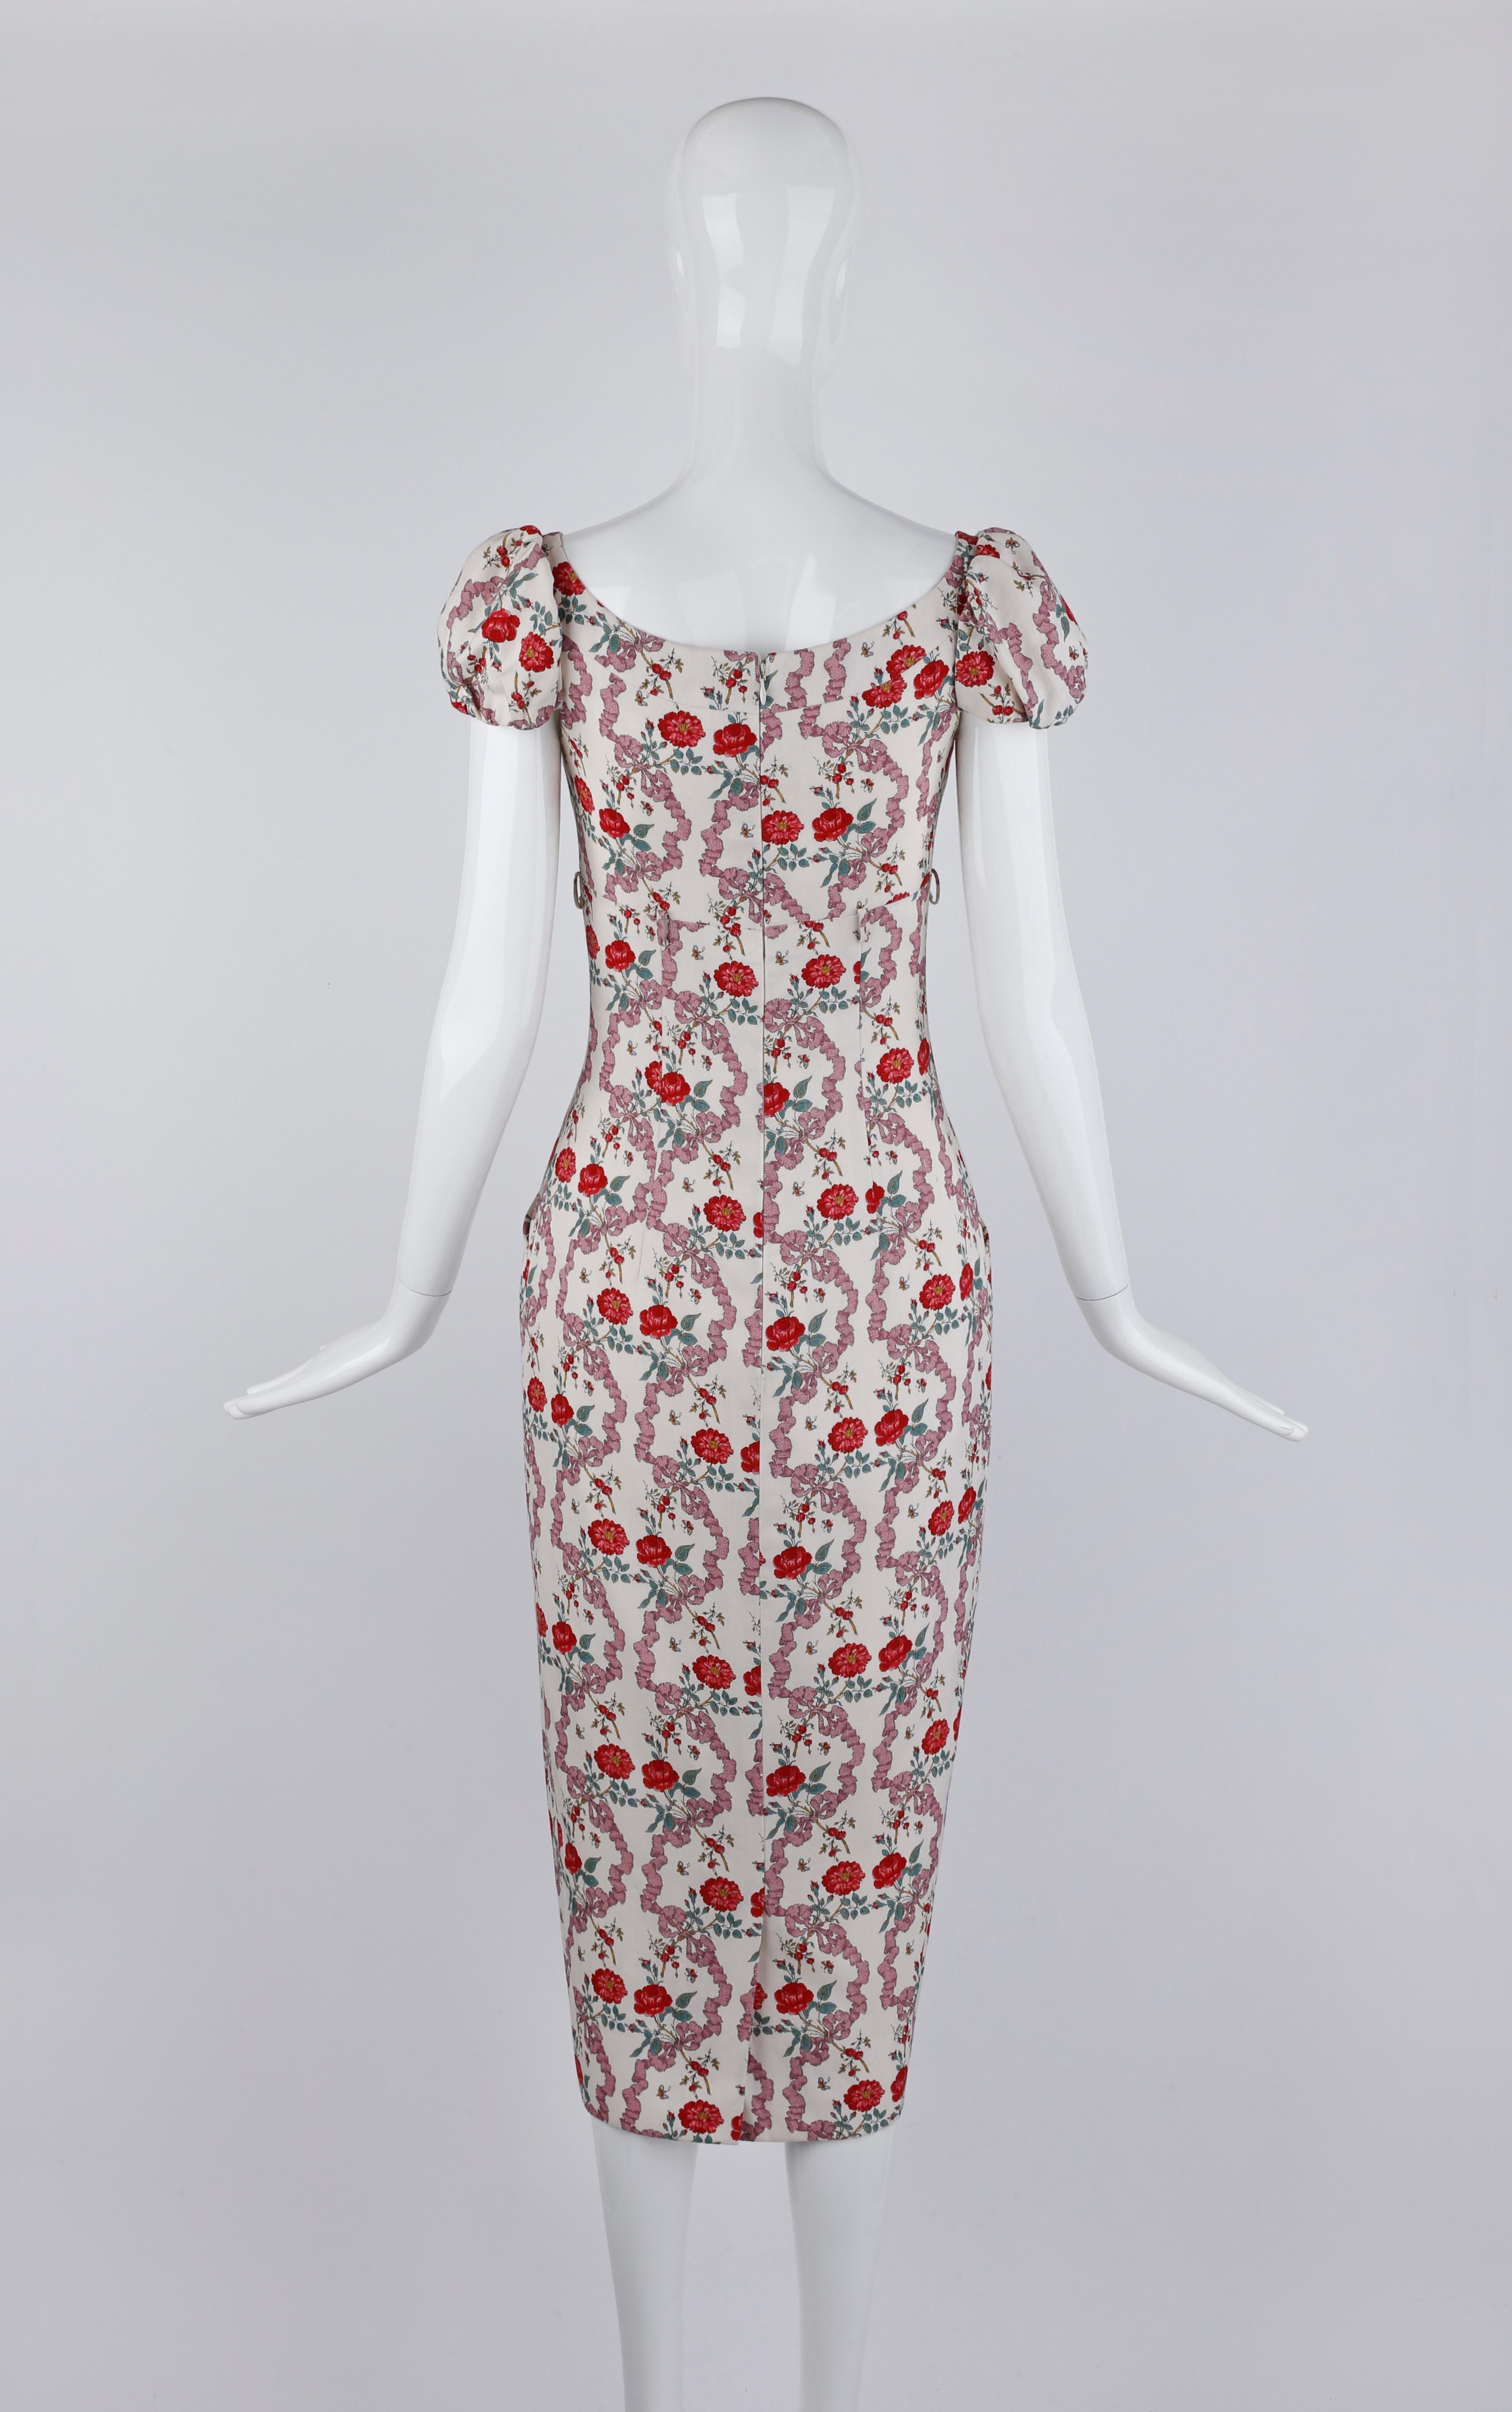 Givenchy Couture John Galliano S/S 1997 Bouquet Floral Ribbon Print Midi Dress For Sale 1